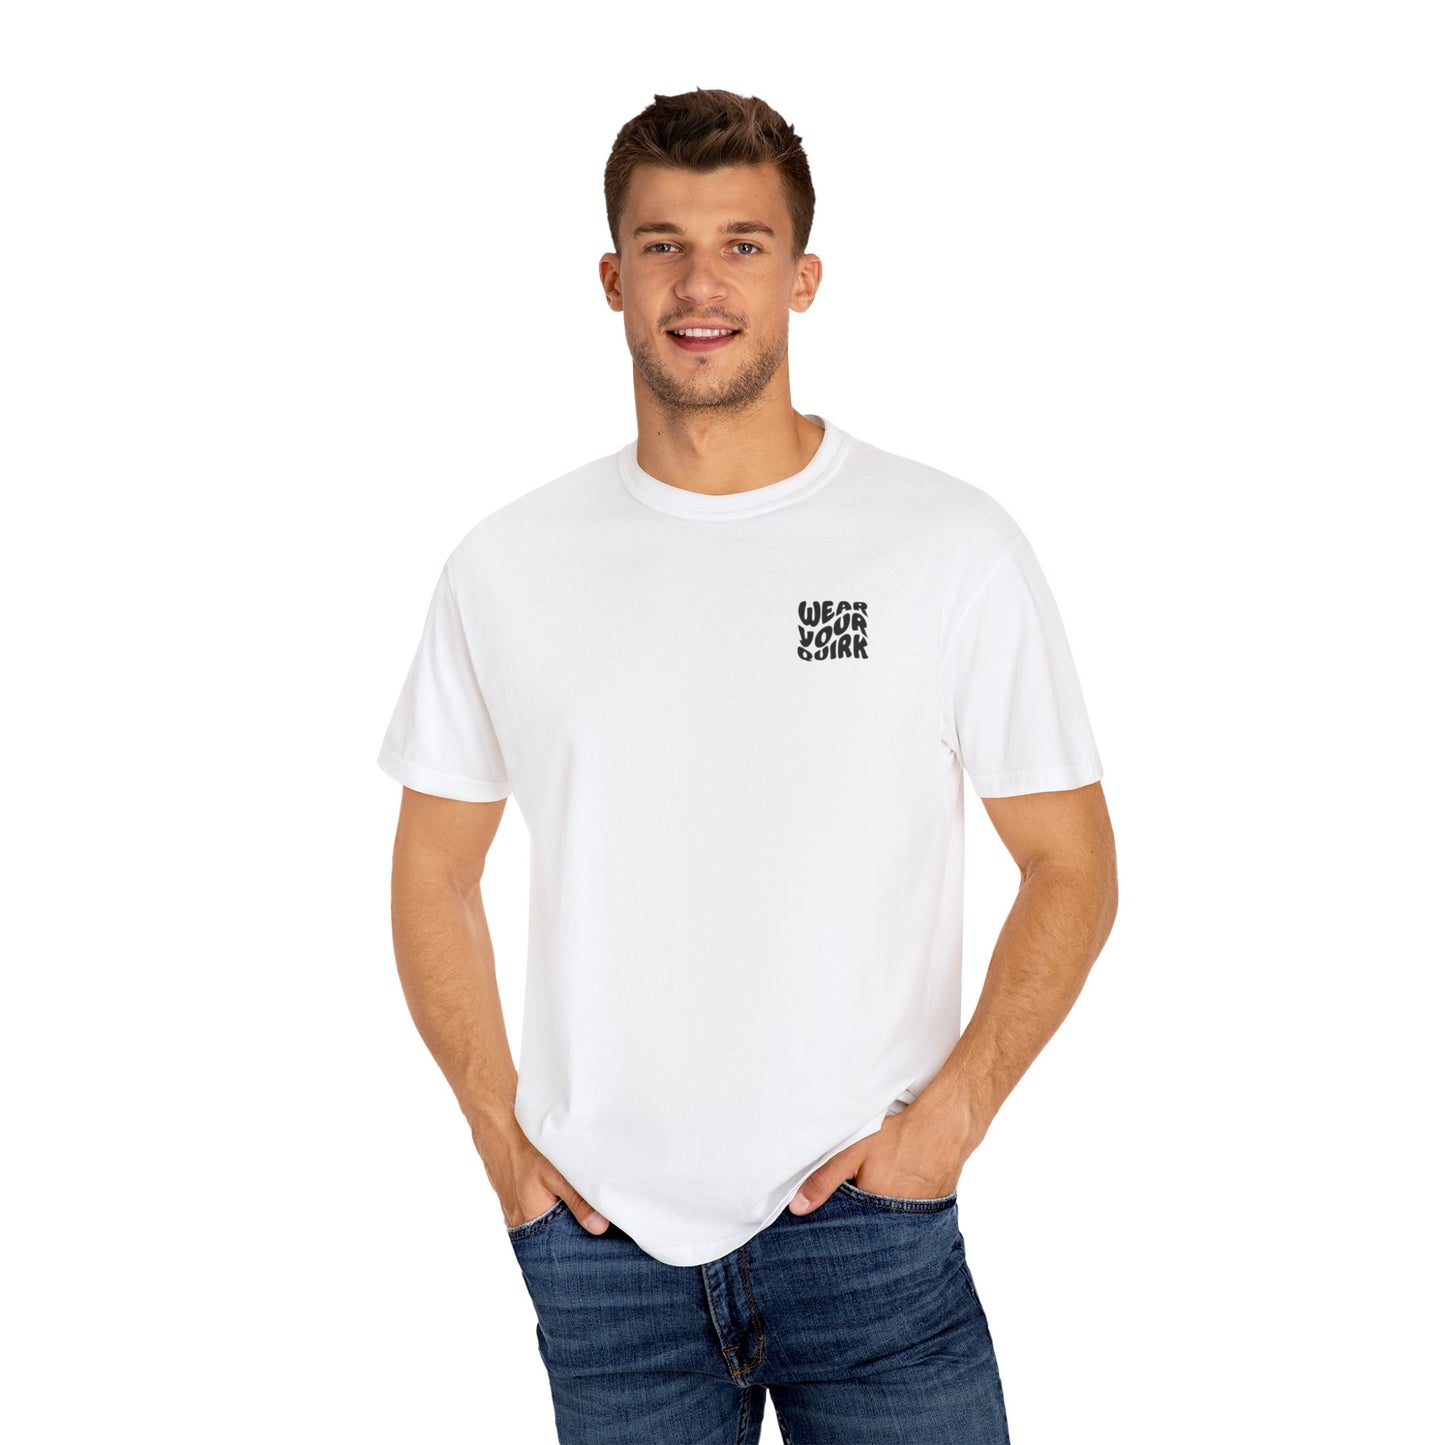 Happy Surfing DogT-shirt